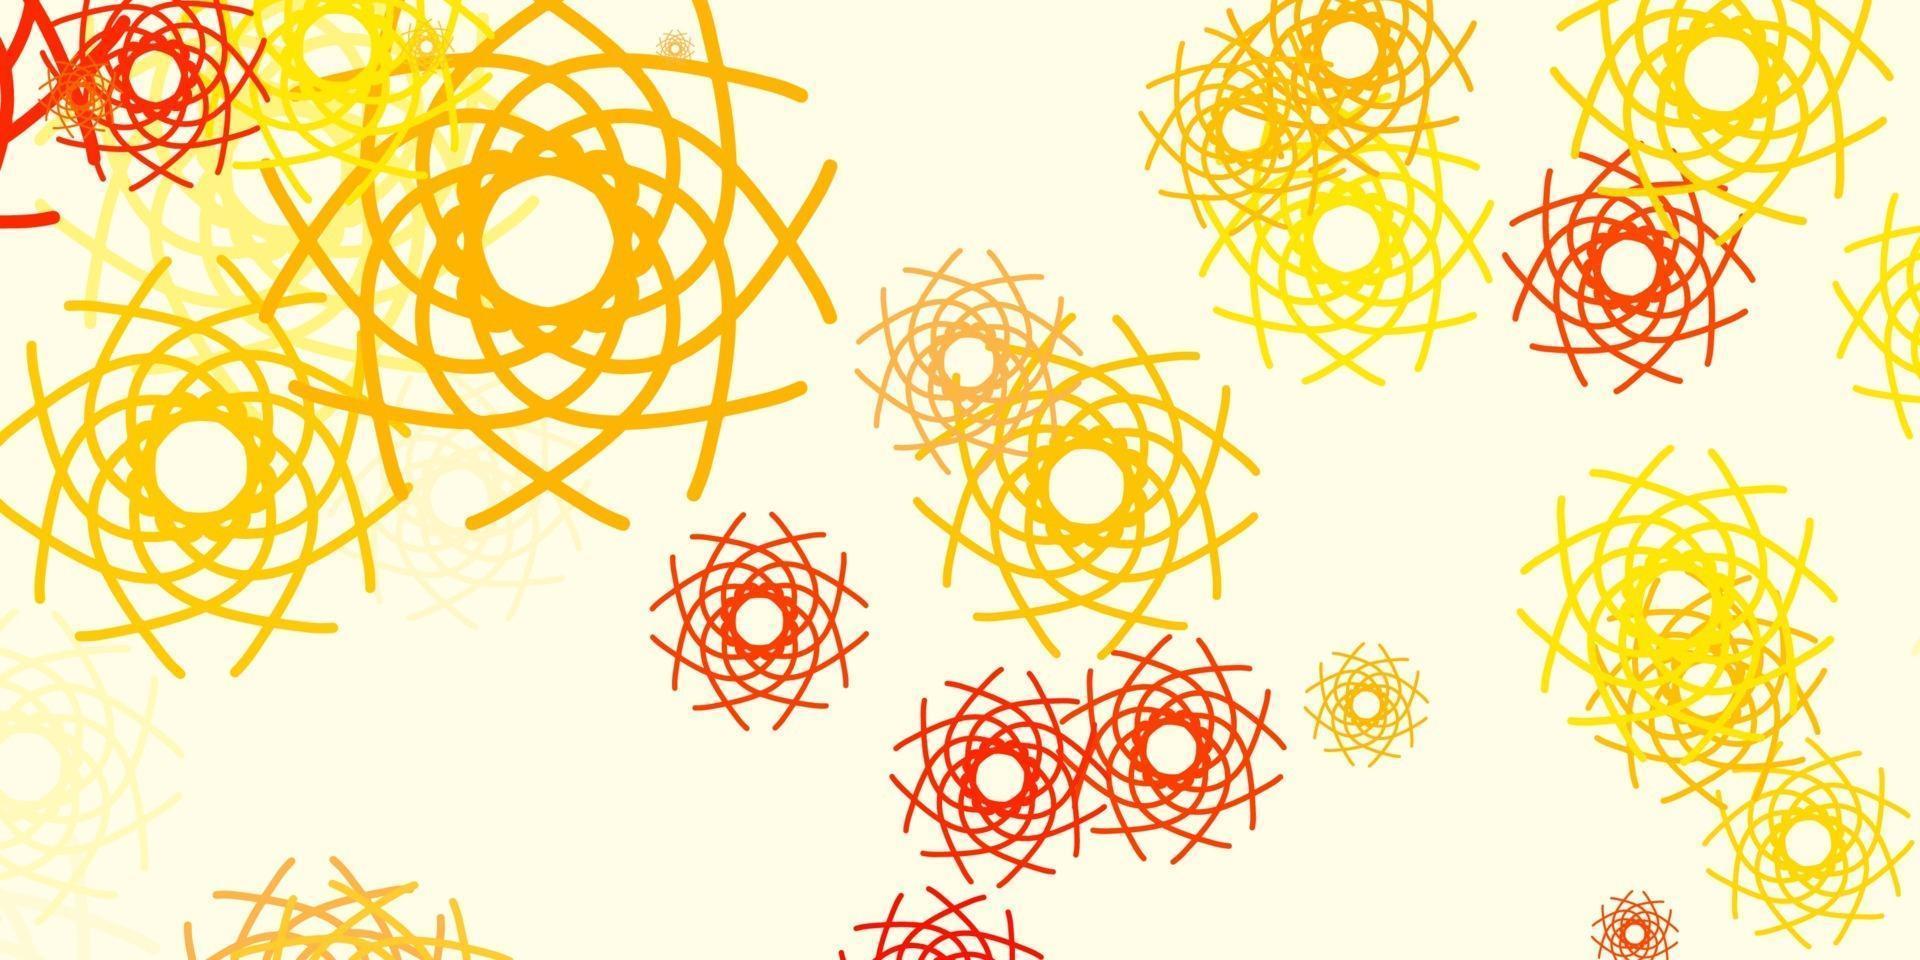 Light Orange vector backdrop with chaotic shapes.